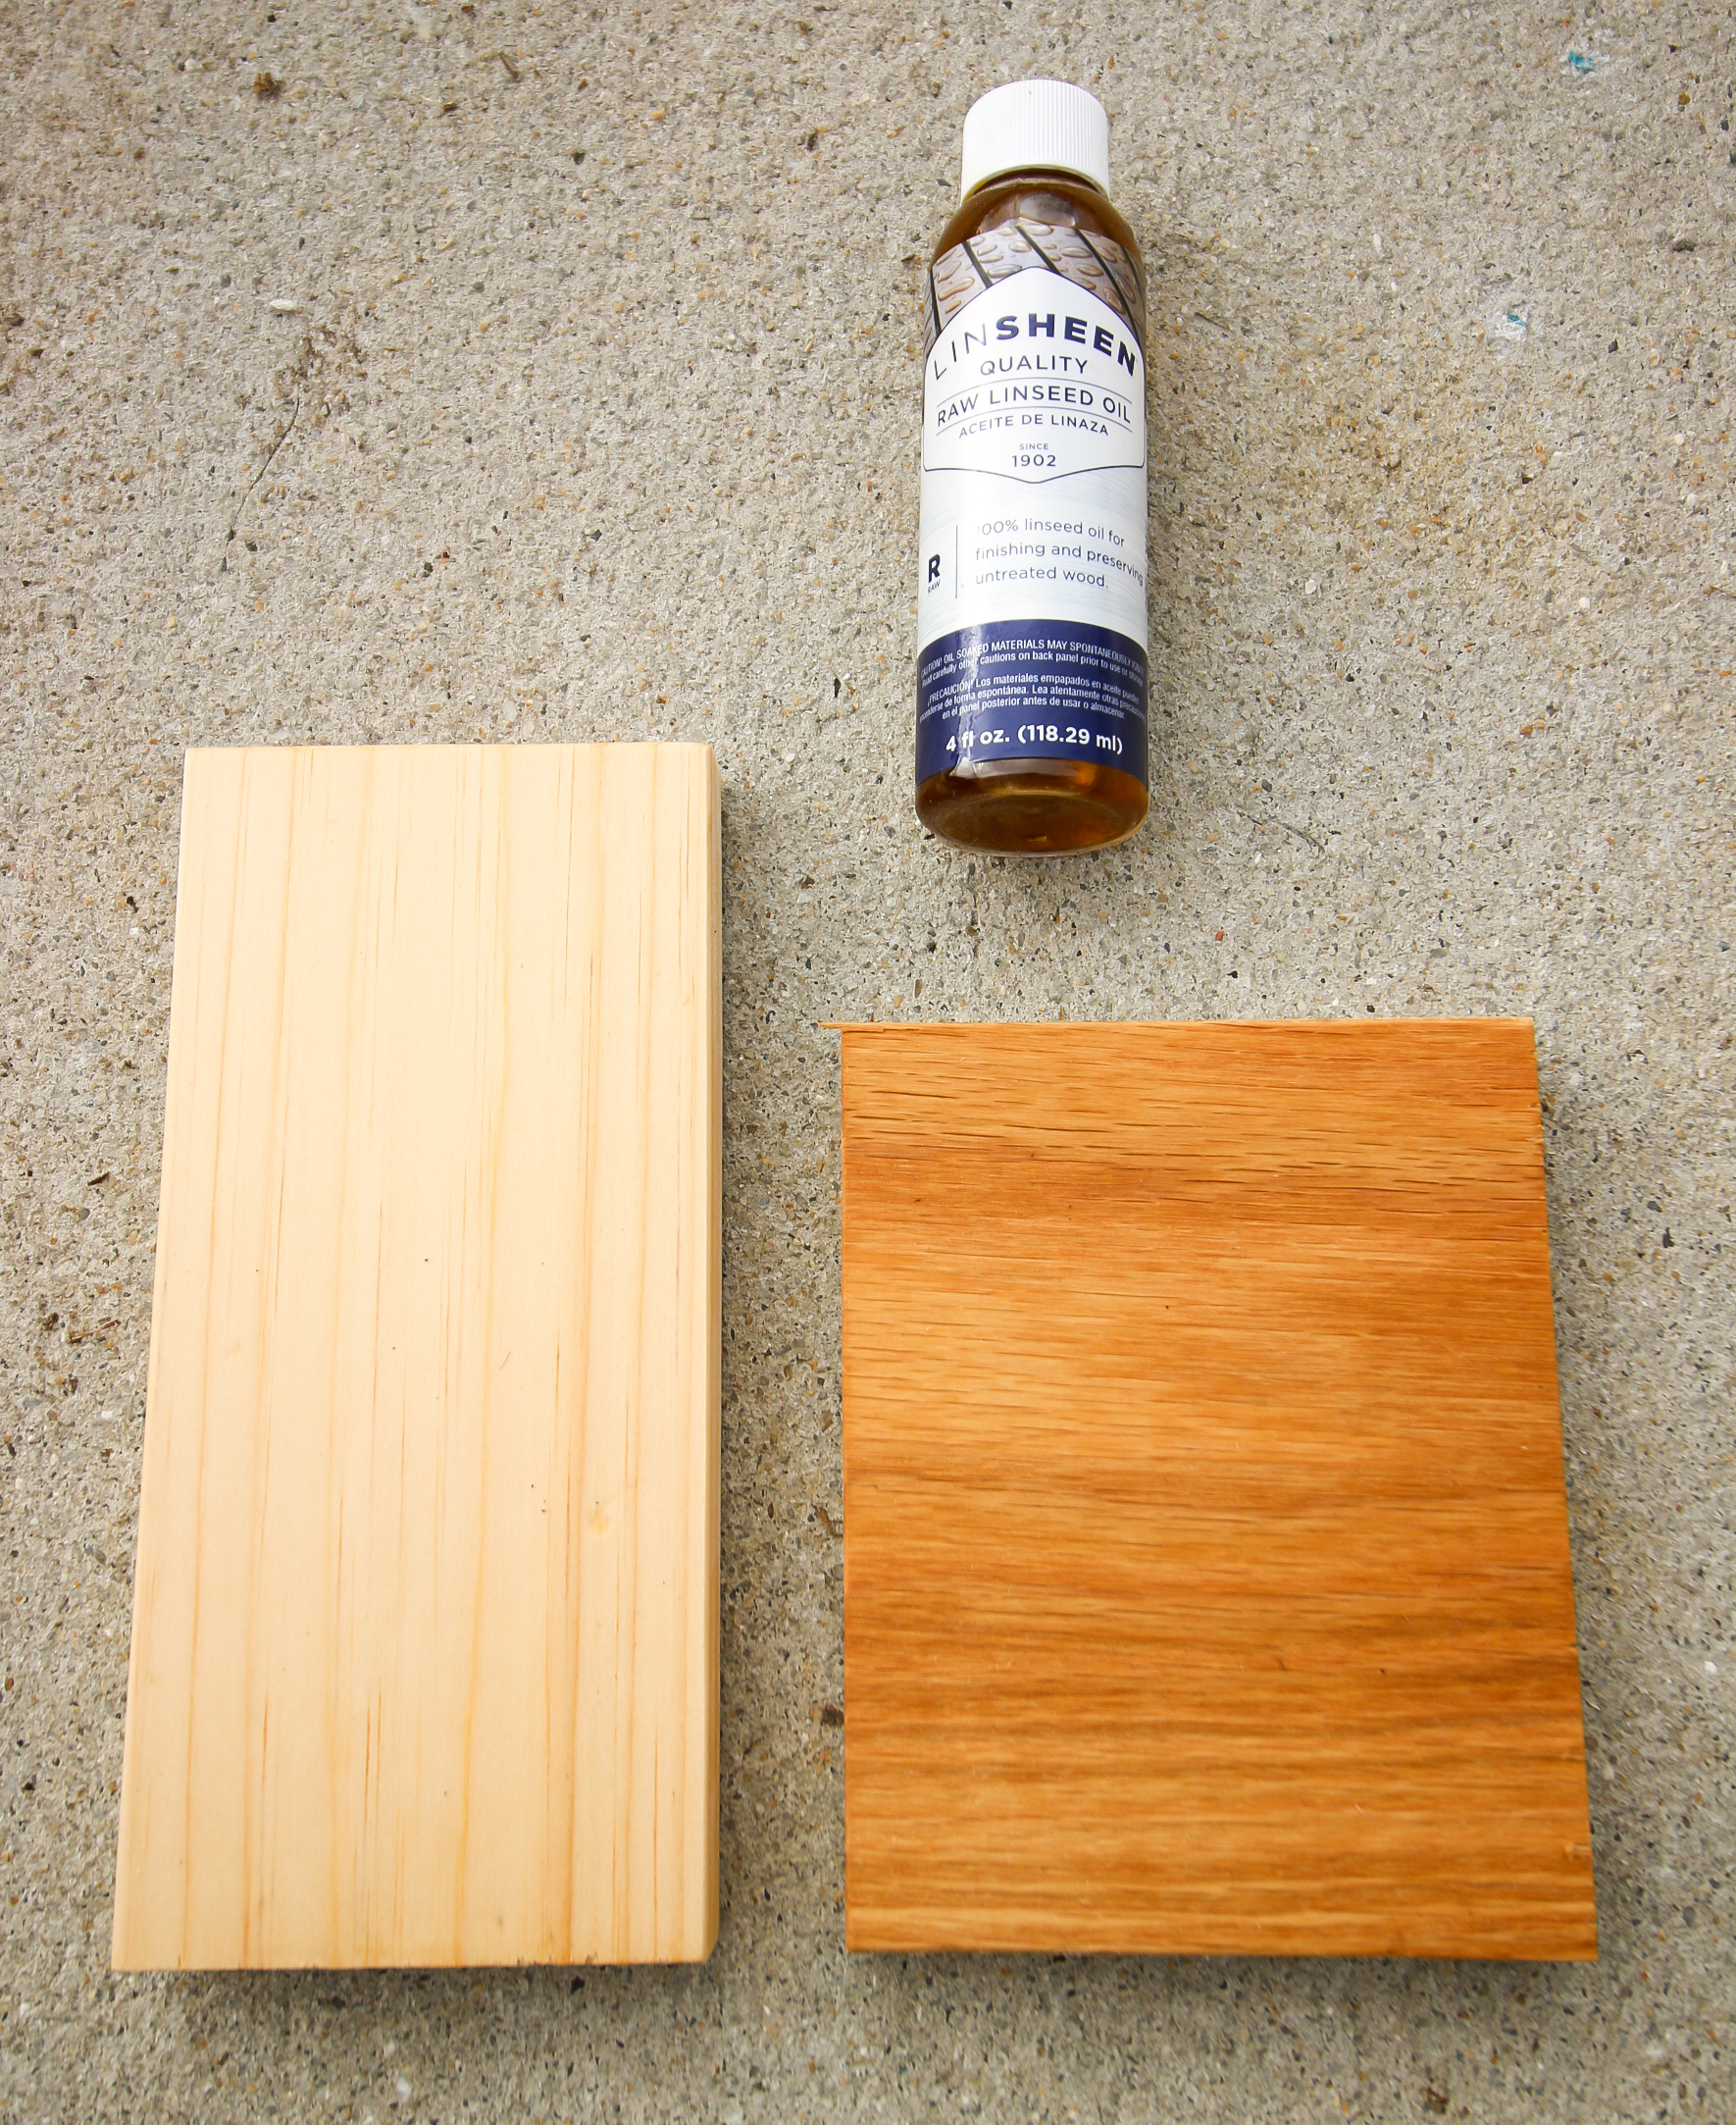 How to use linseed oil on wood projects